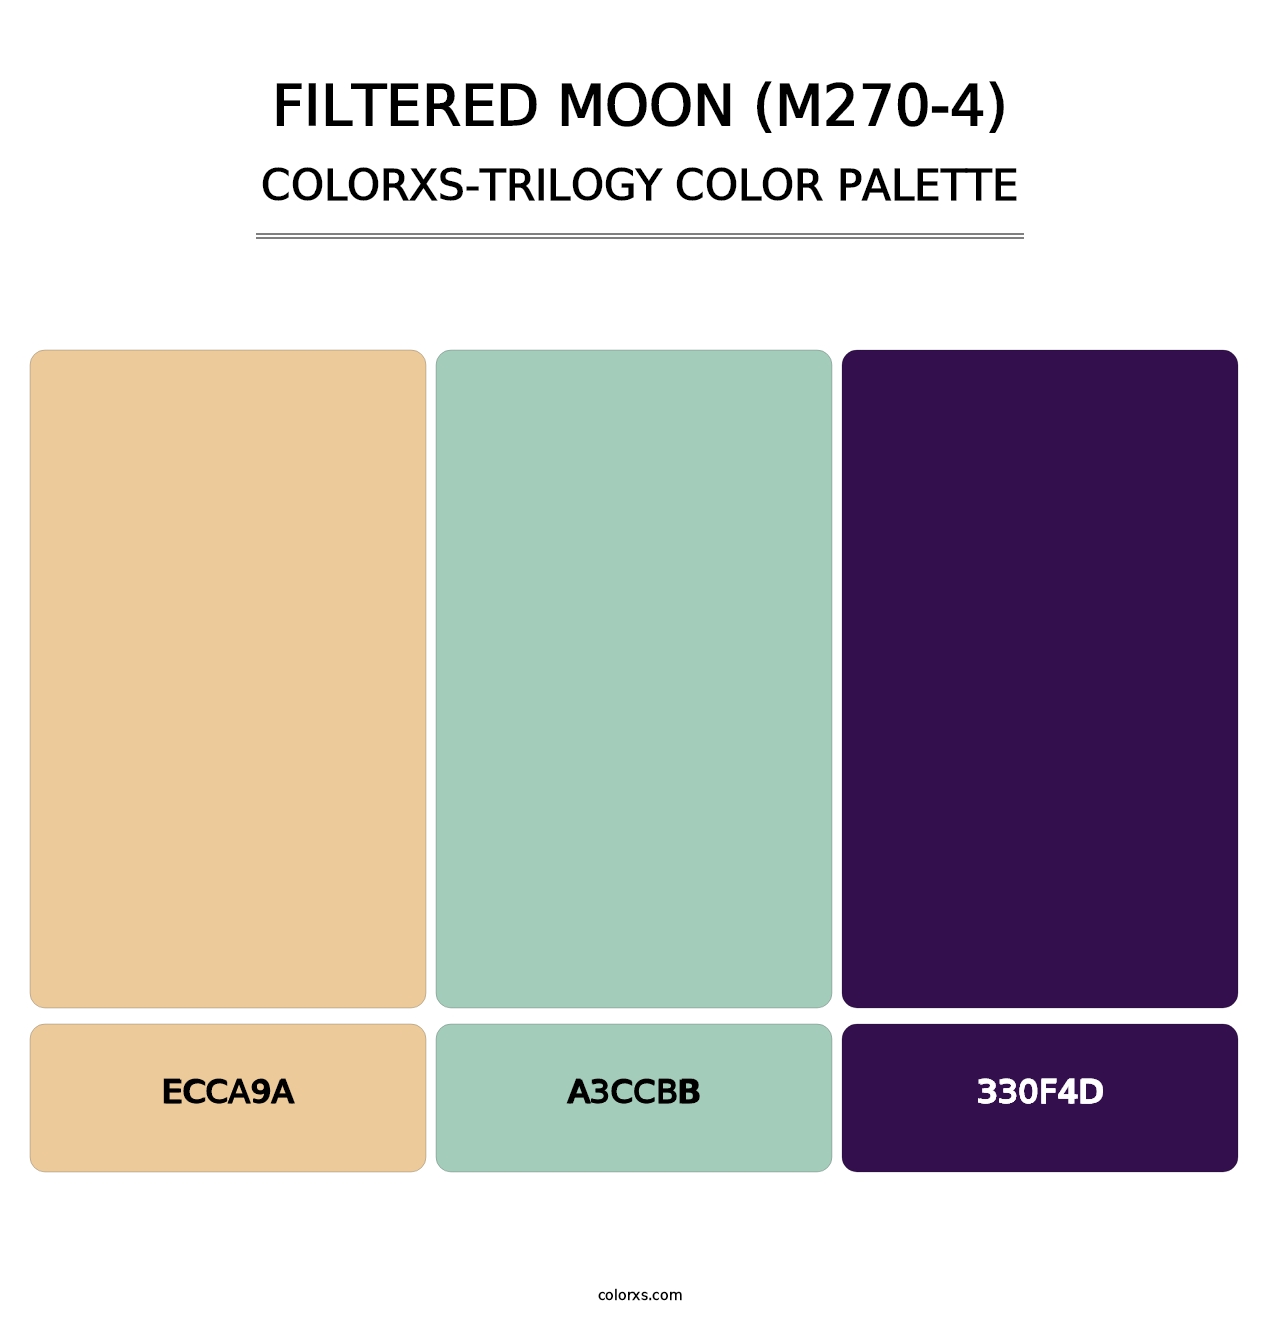 Filtered Moon (M270-4) - Colorxs Trilogy Palette